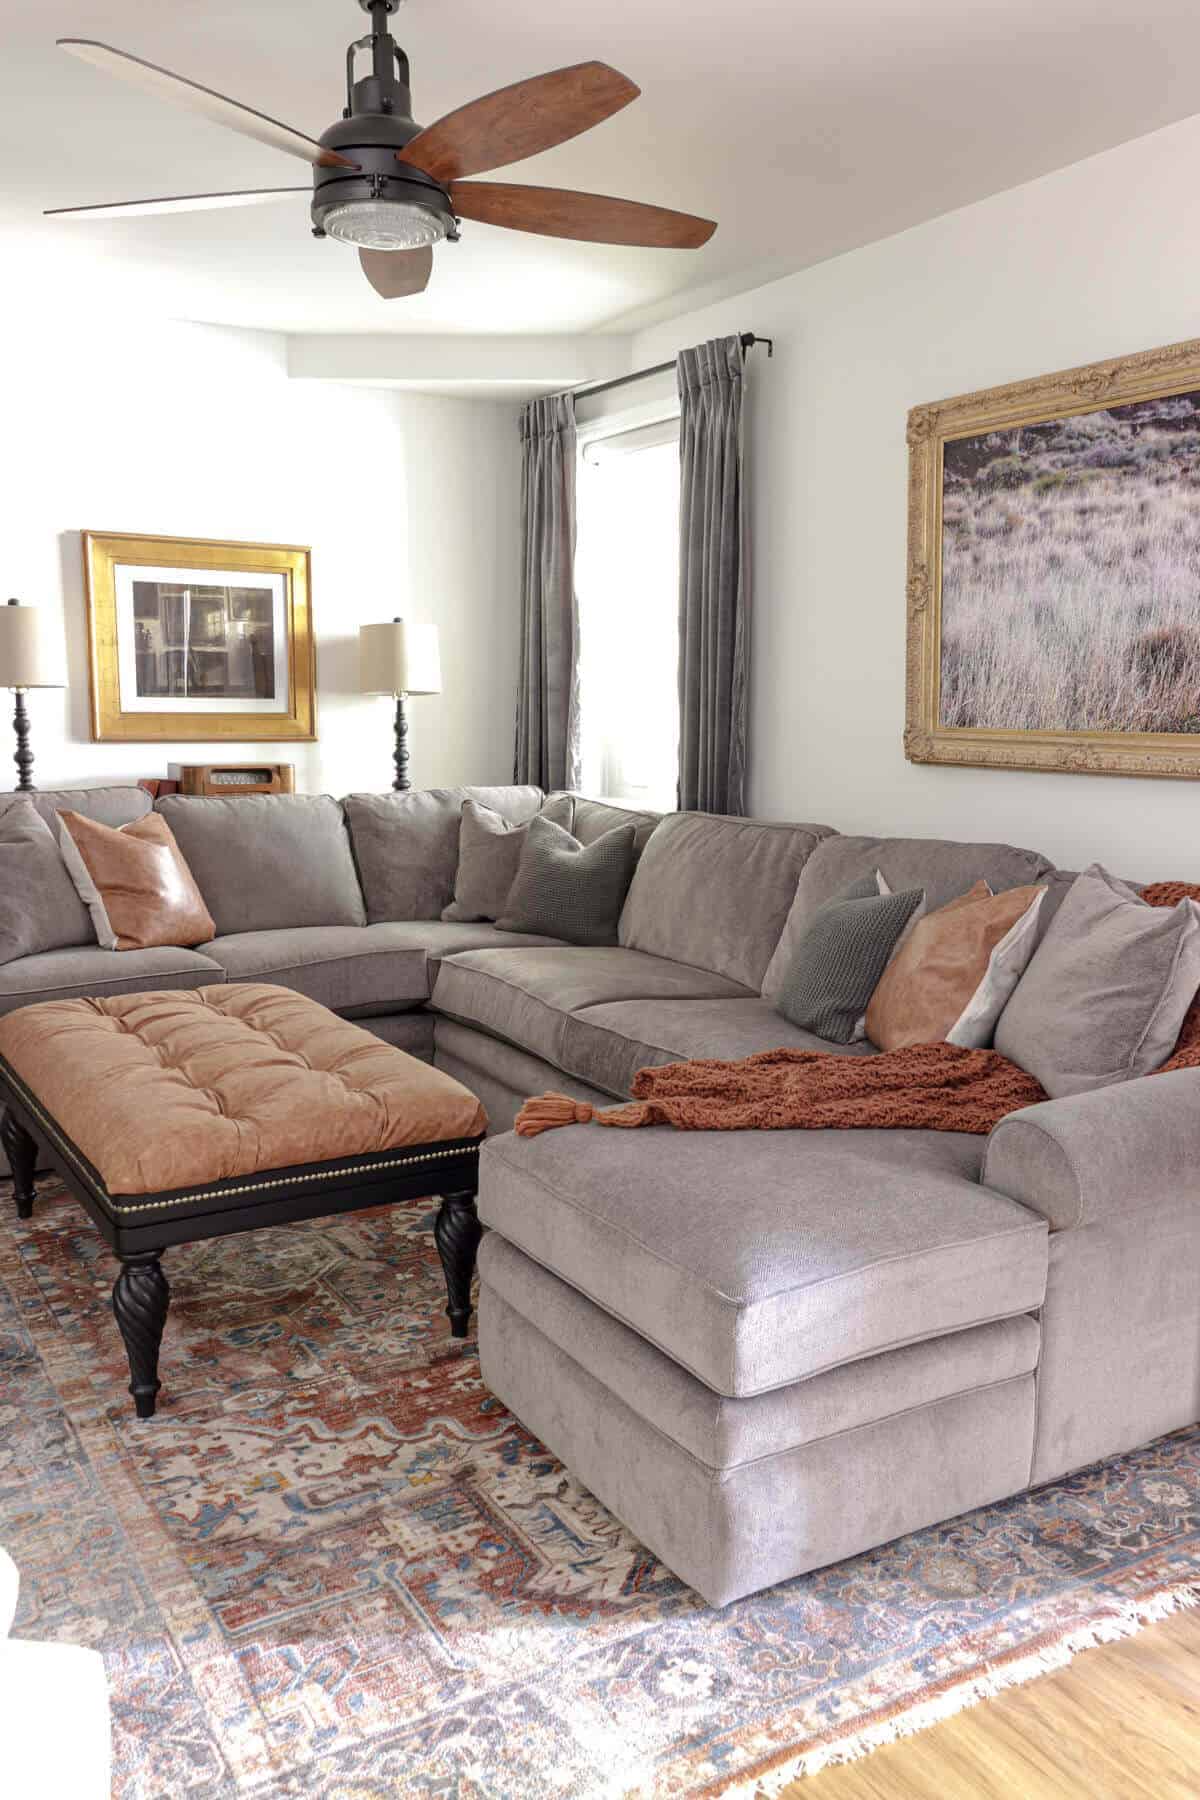 gray lazboy sectional sofa in a basement room with cognac leather accents and tufted ottoman